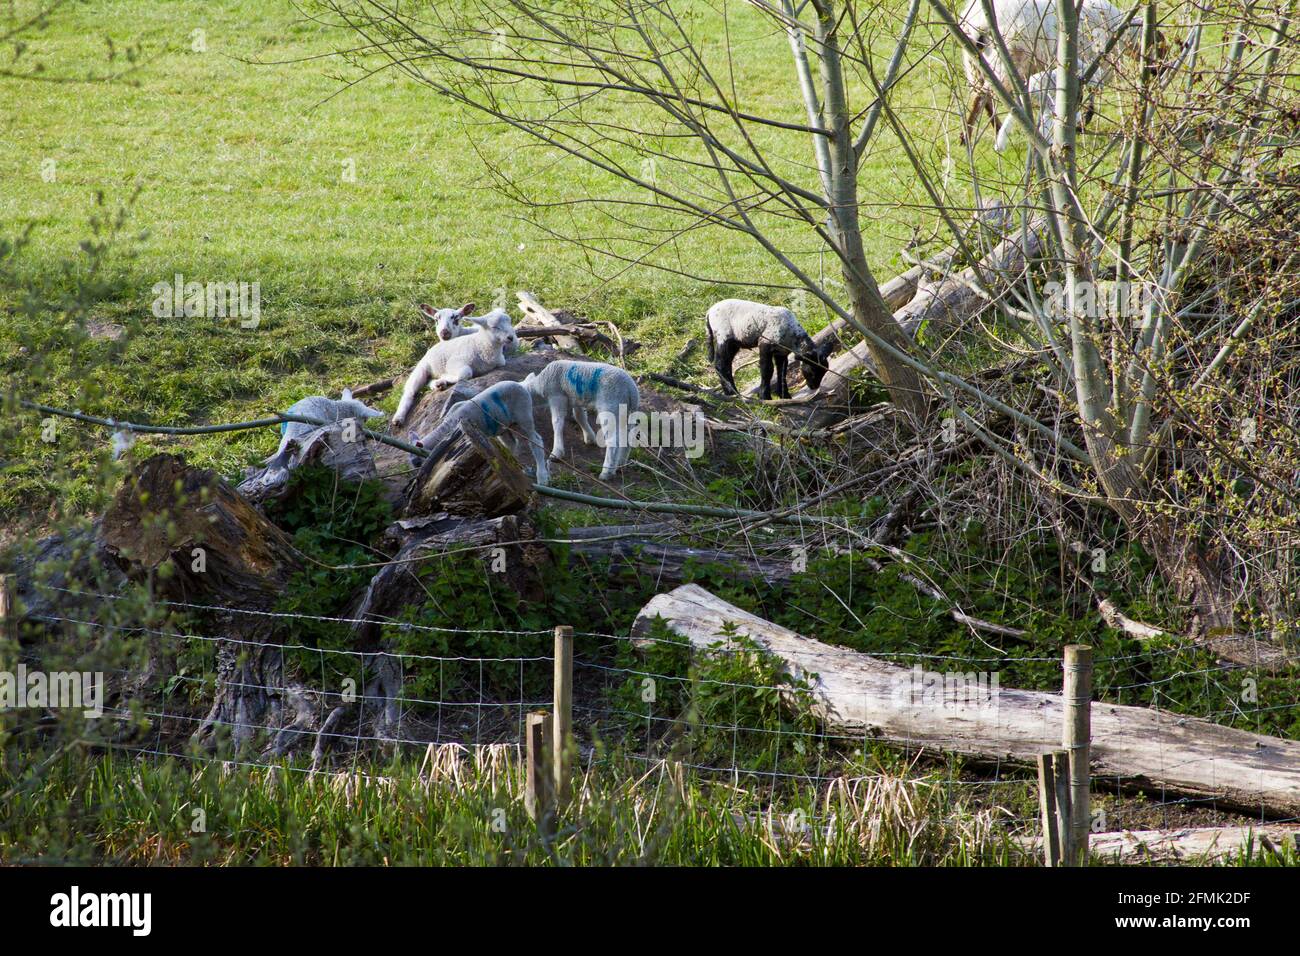 Springtime in England. Lambs playing near a river, with mum looking on. Stock Photo